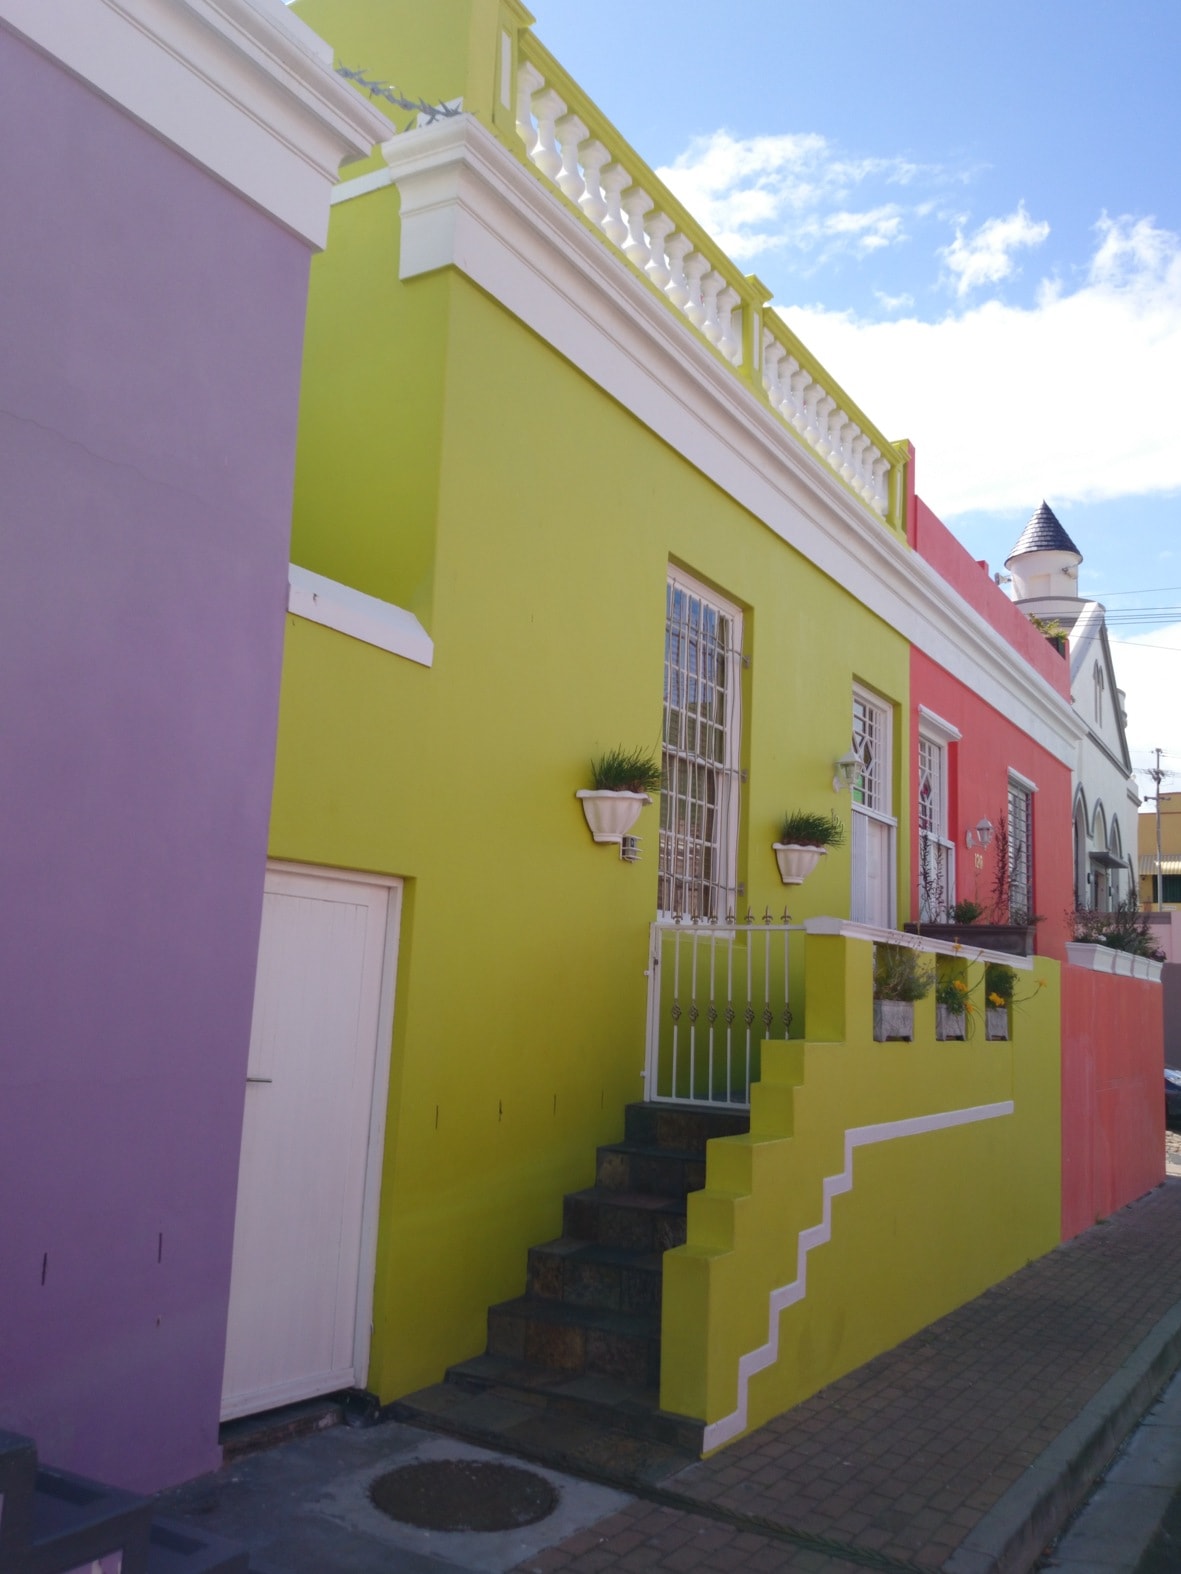 Bed and breakfast in south africa — view of the bed & breakfast at 22 on rose in bo-kaap, cape town, south africa.